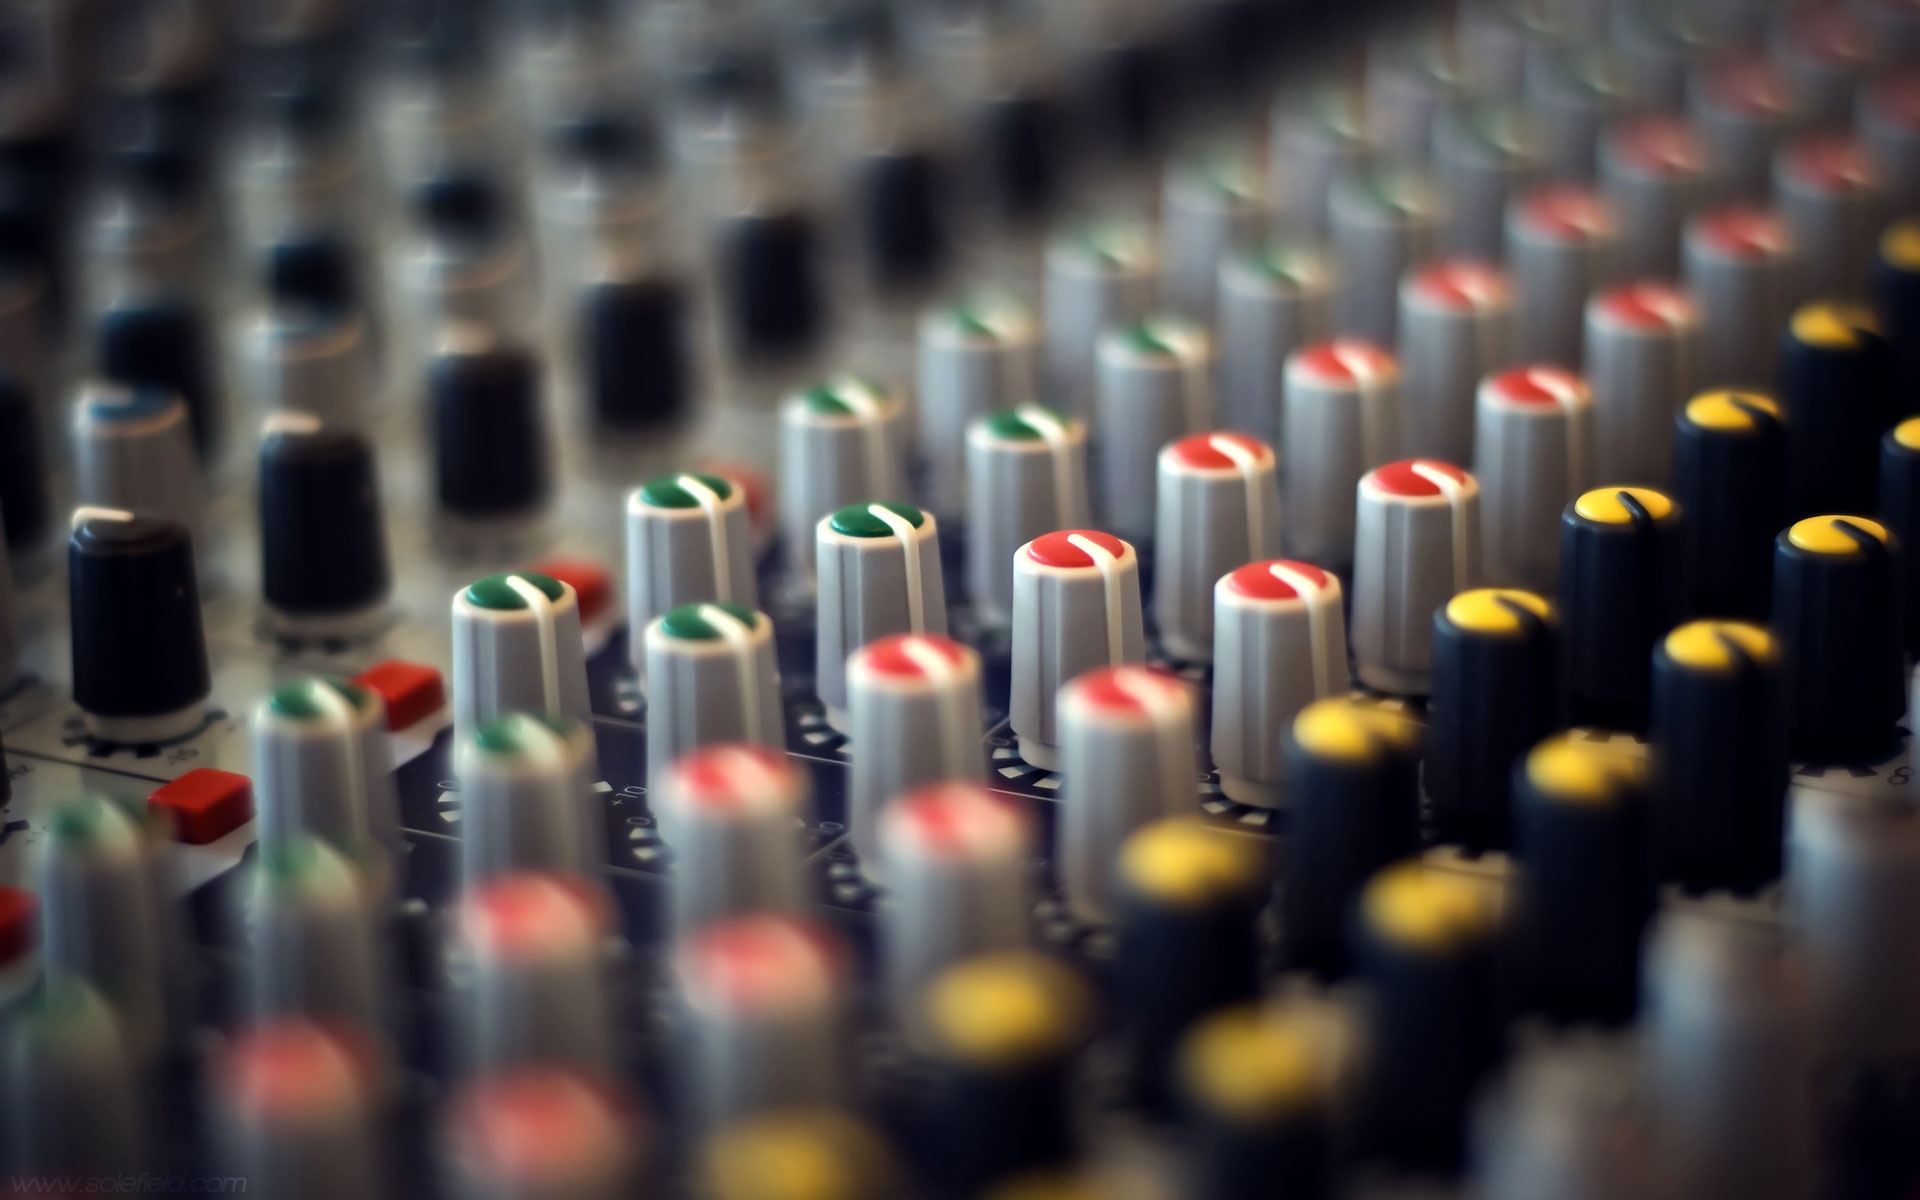 Mixing Console Wallpapers